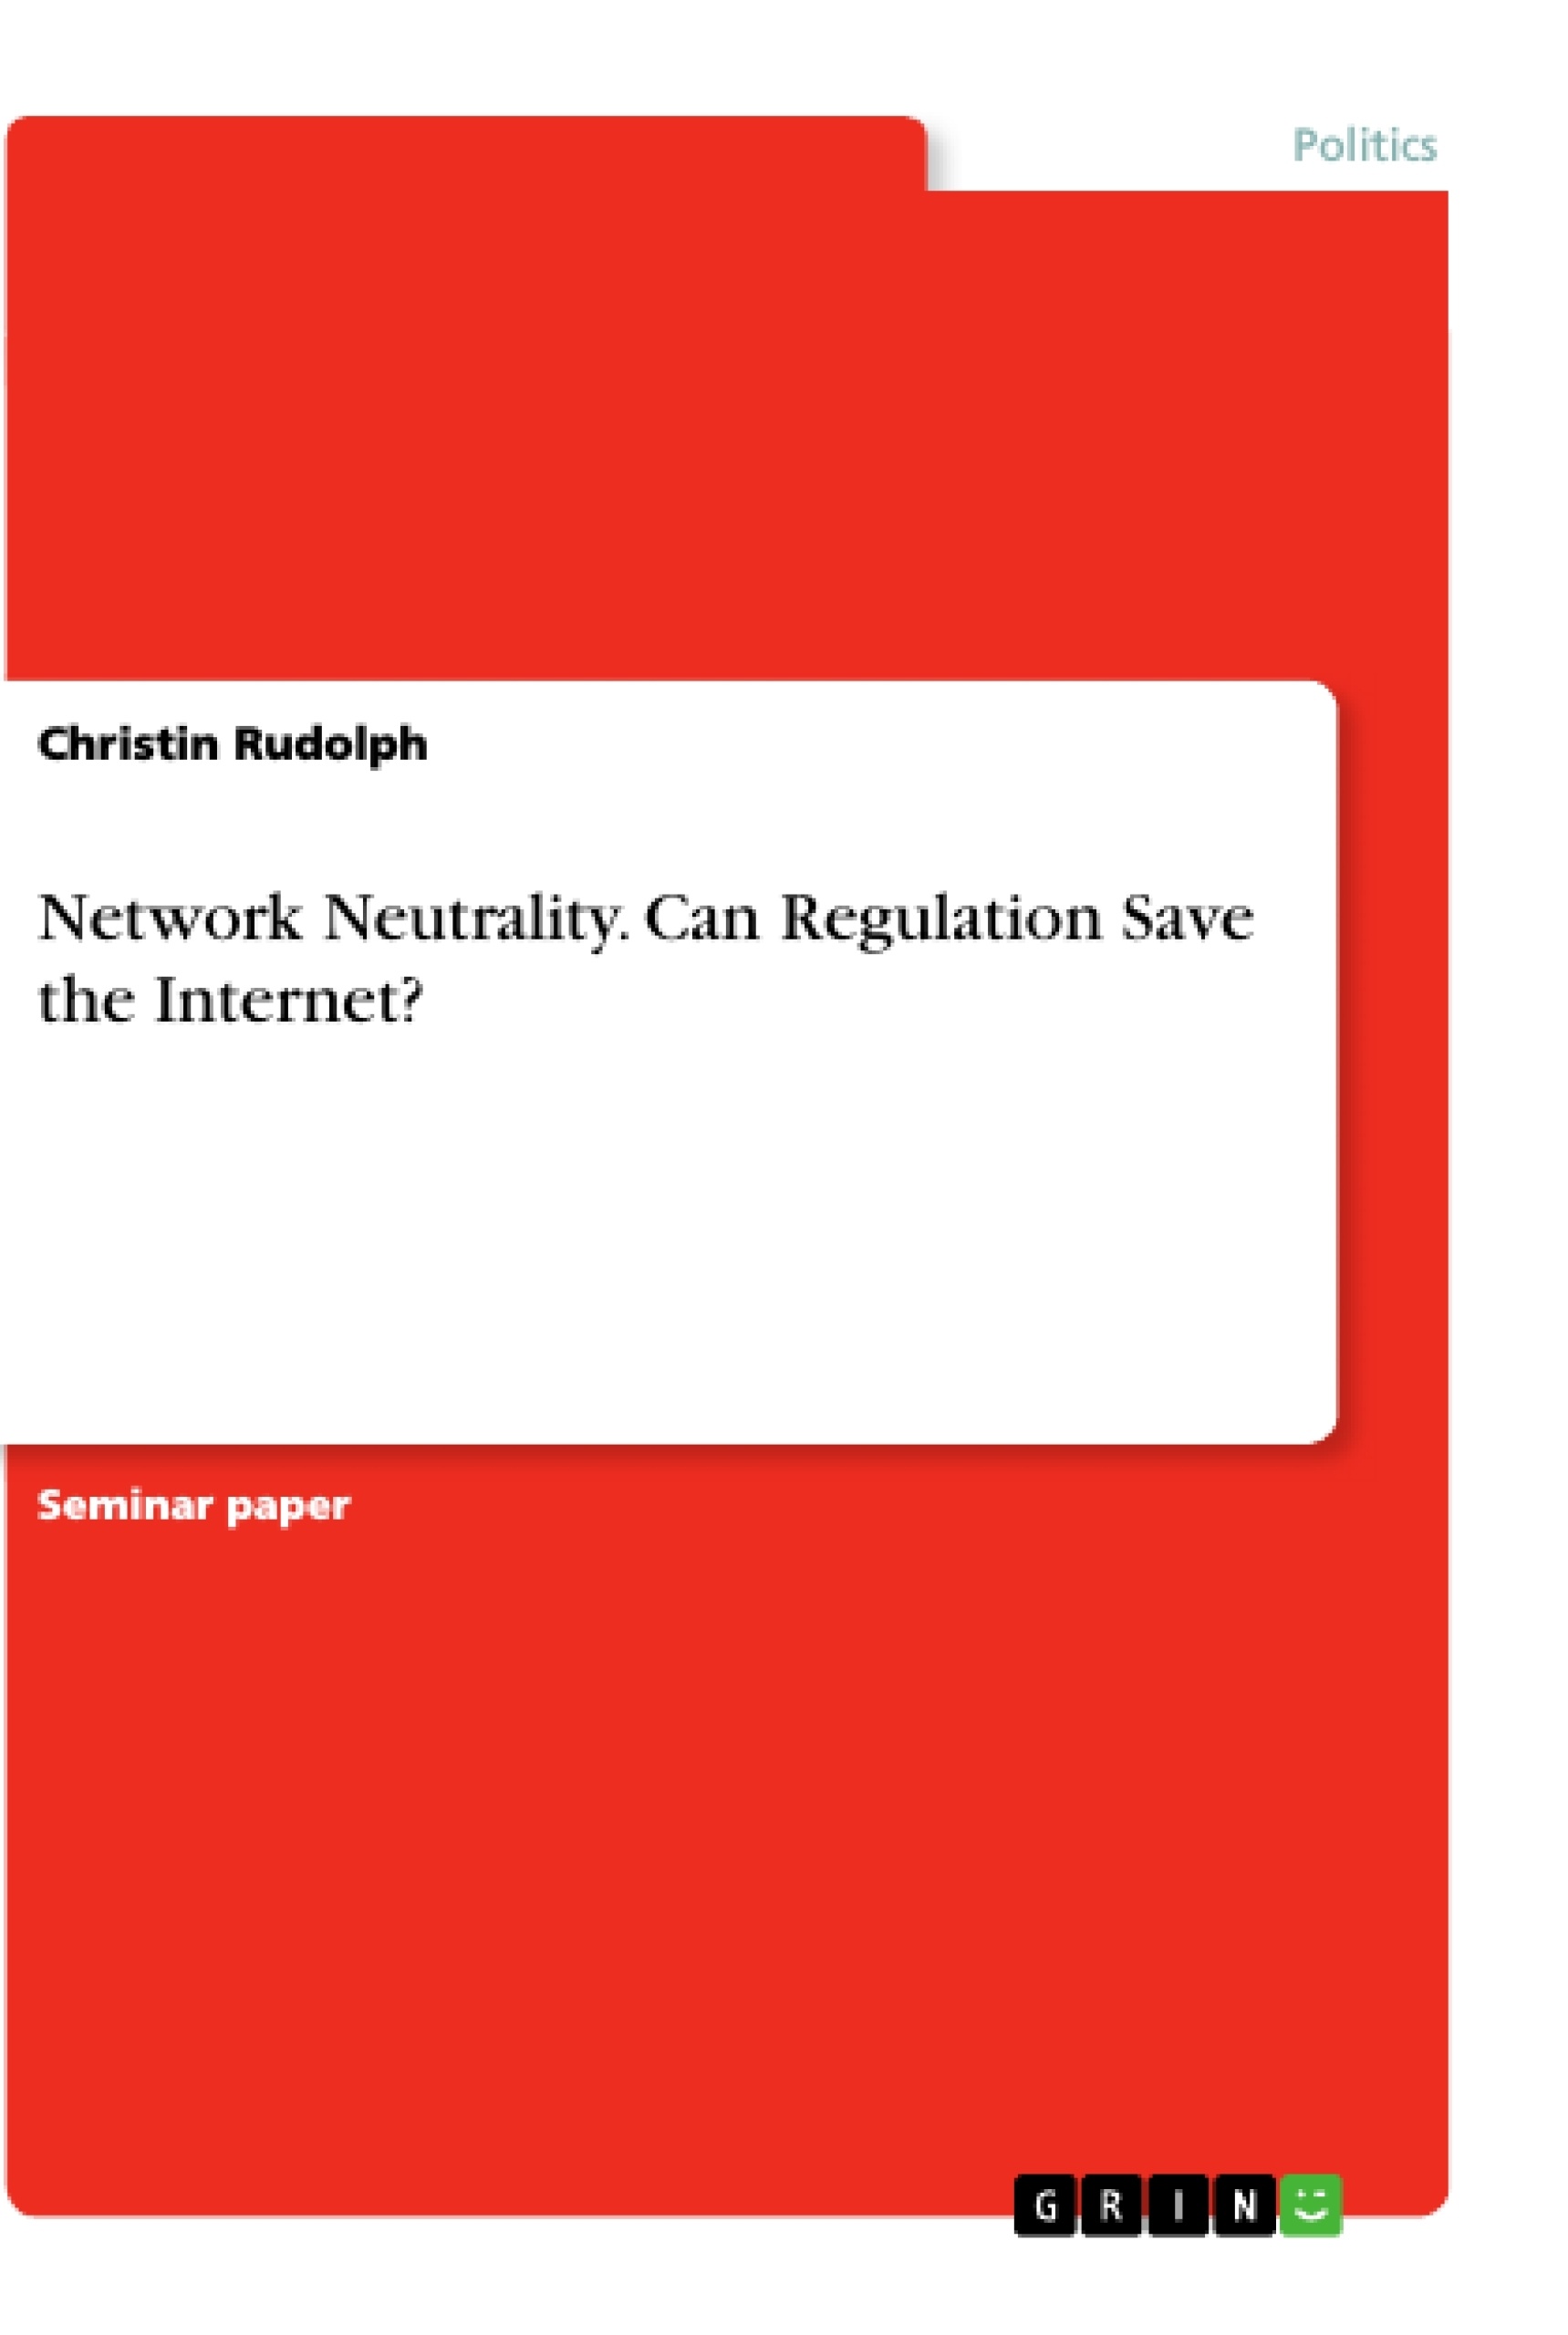 Title: Network Neutrality. Can Regulation Save the Internet?